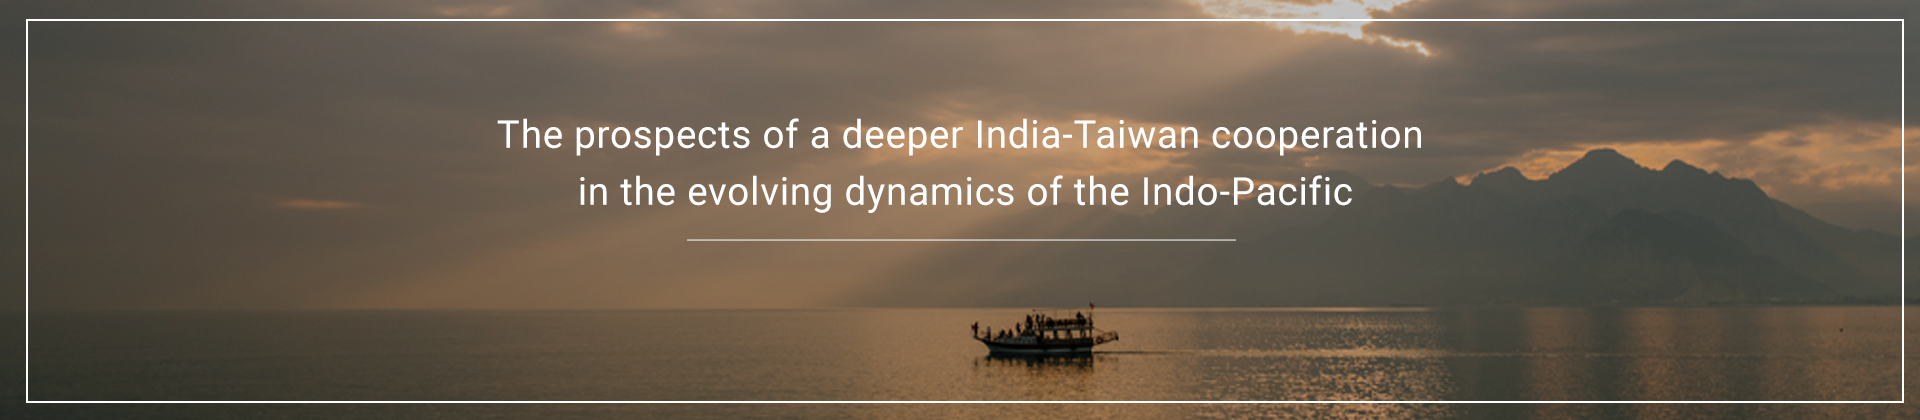 The prospects of a deeper India-Taiwan cooperation in the evolving dynamics of the Indo-Pacific